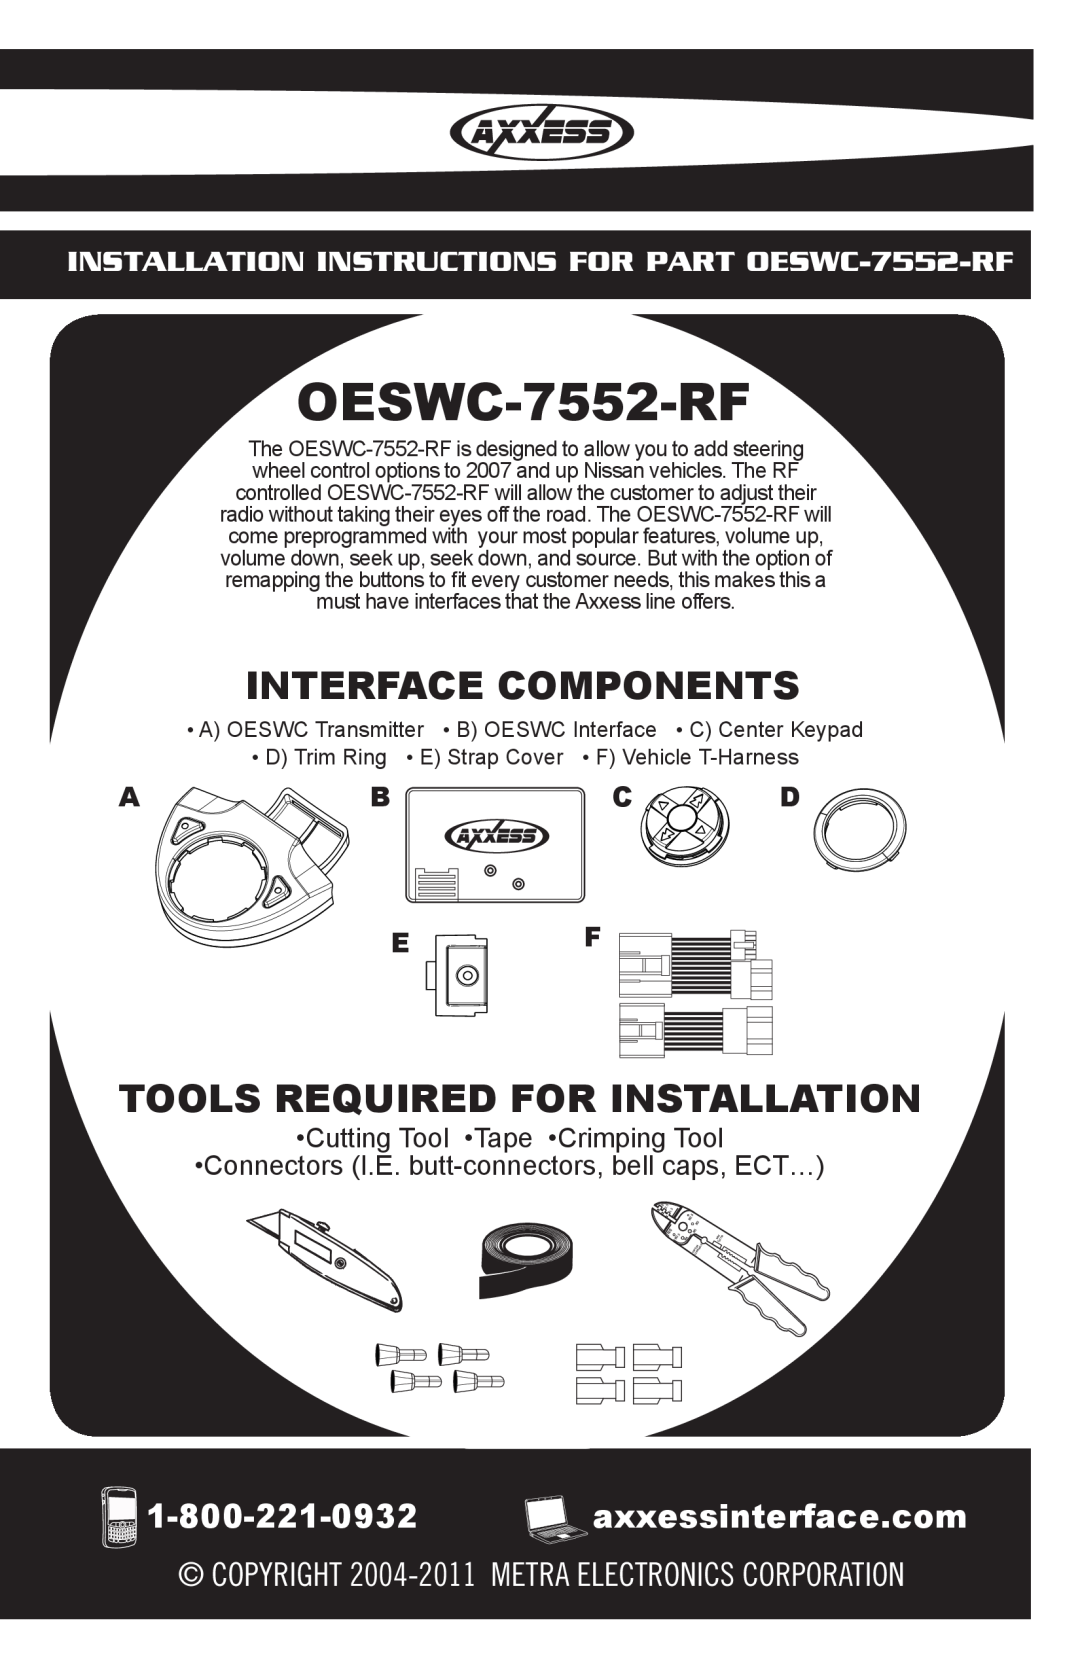 Axxess Interface OESWC-7552-RF installation instructions Interface Components, Tools Required For Installation, A B E 